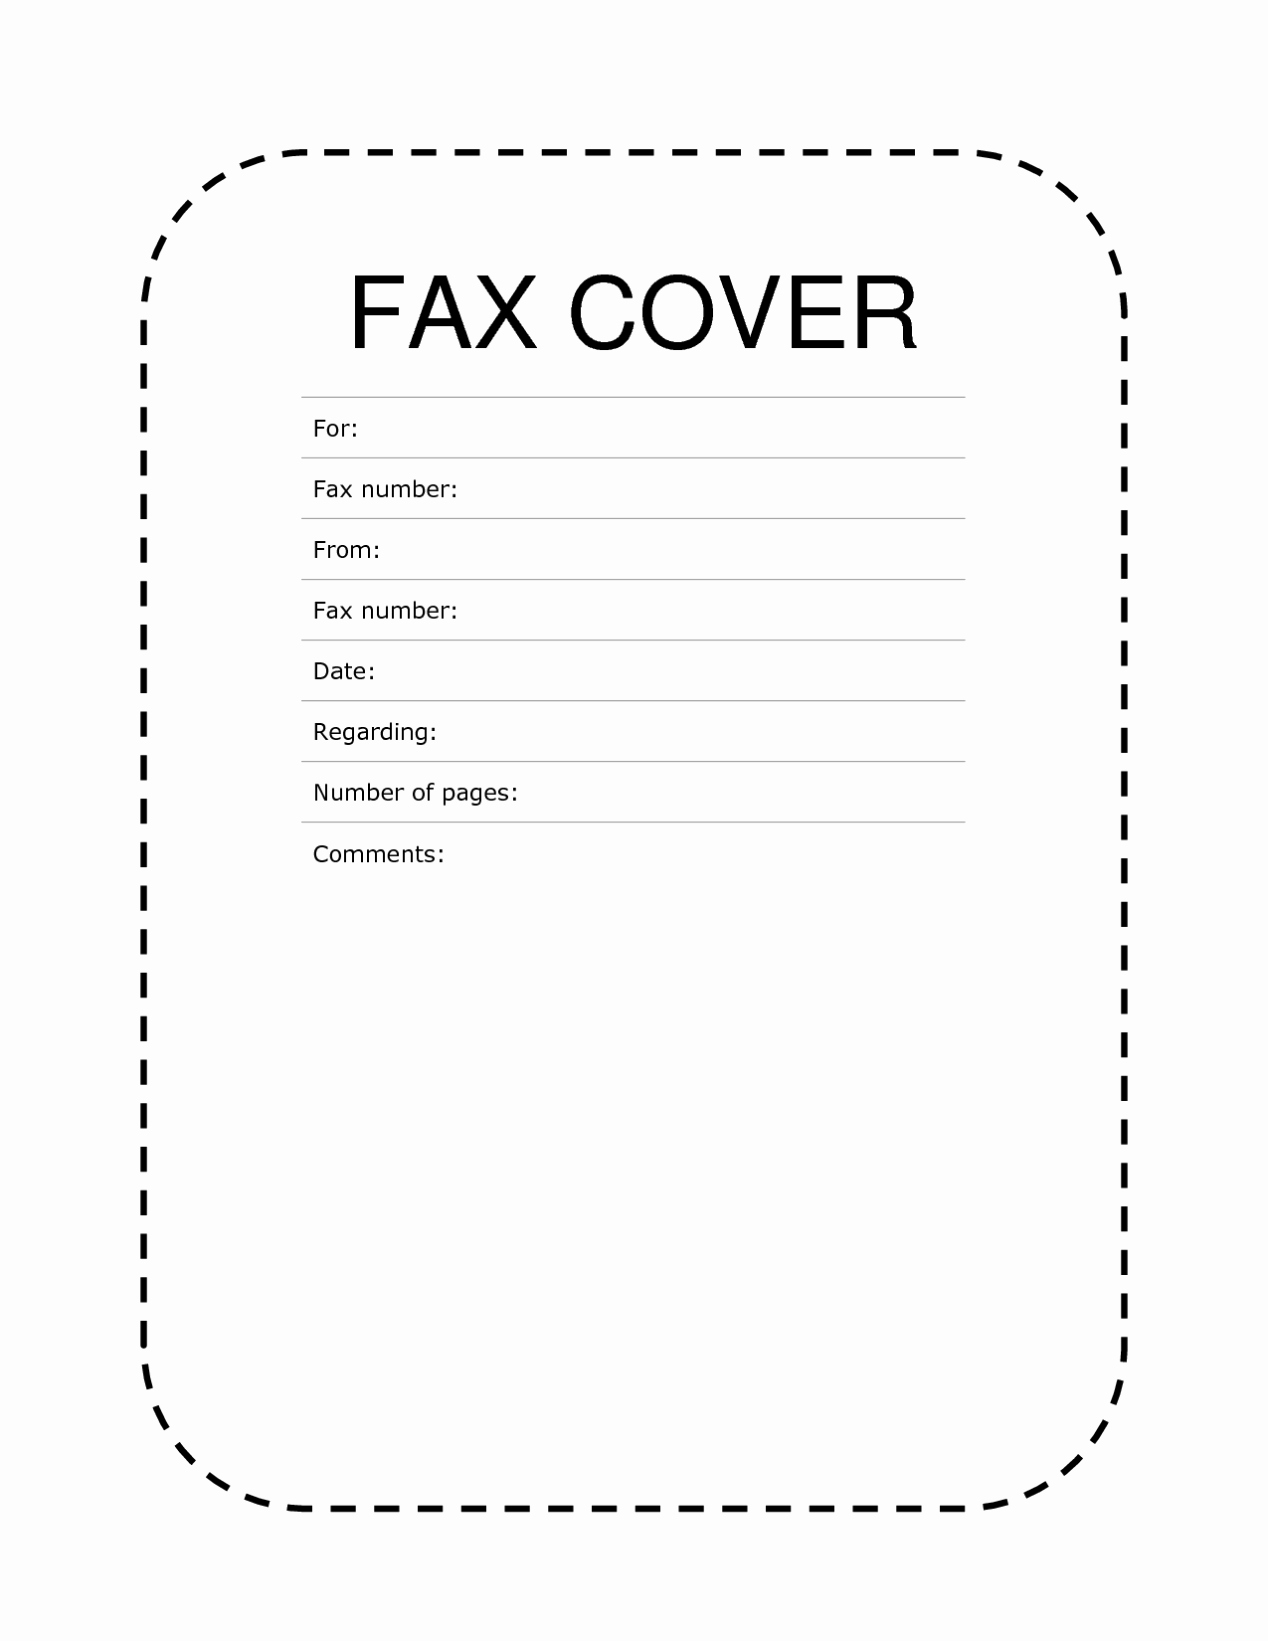 Sample Of Fax Cover Sheet Inspirational Free Printable Fax Cover Sheet Pdf Word Template Sample